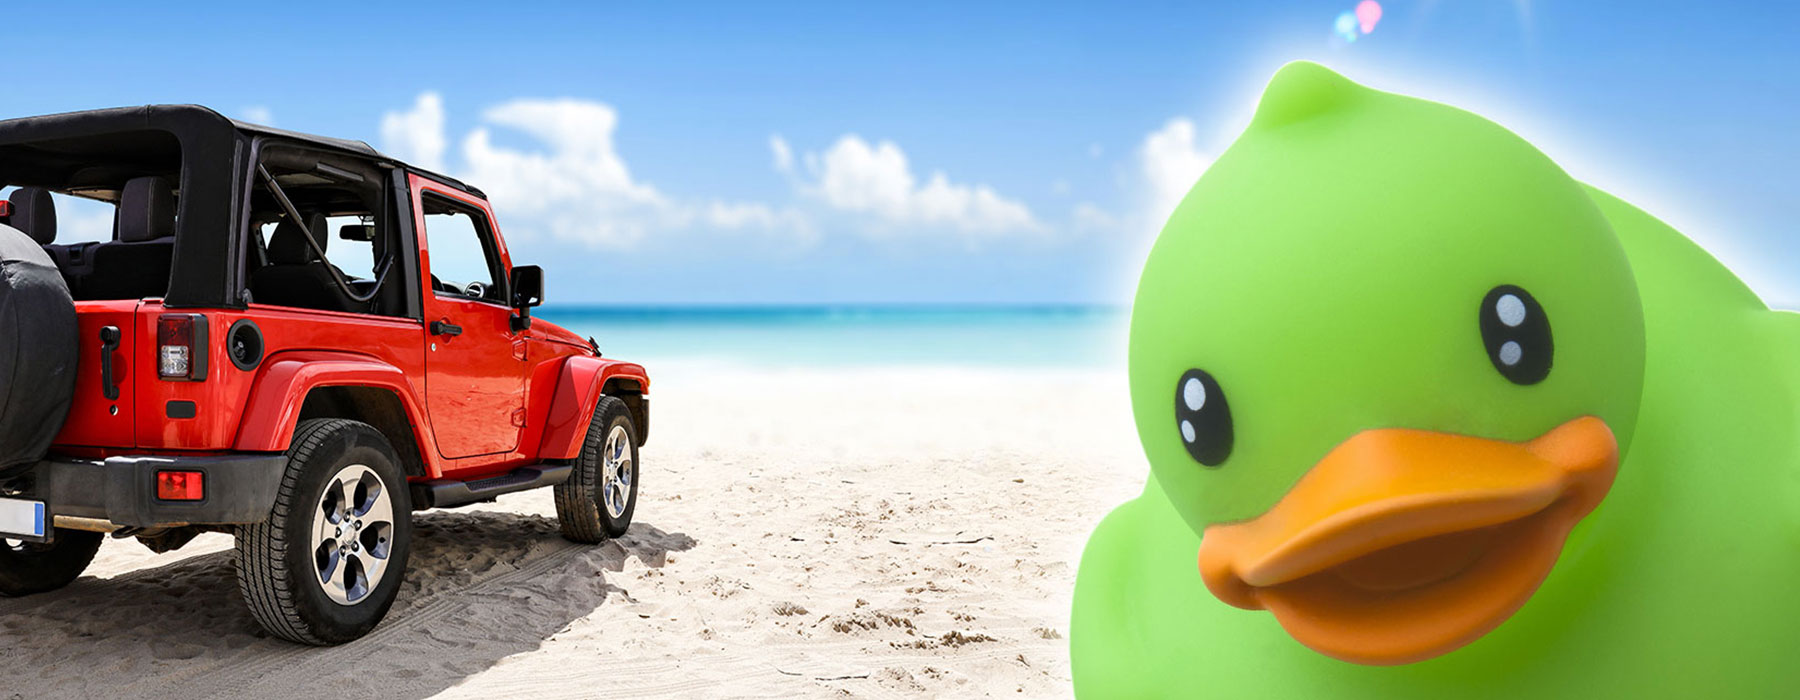 Jeep on beach with big green duck to the side